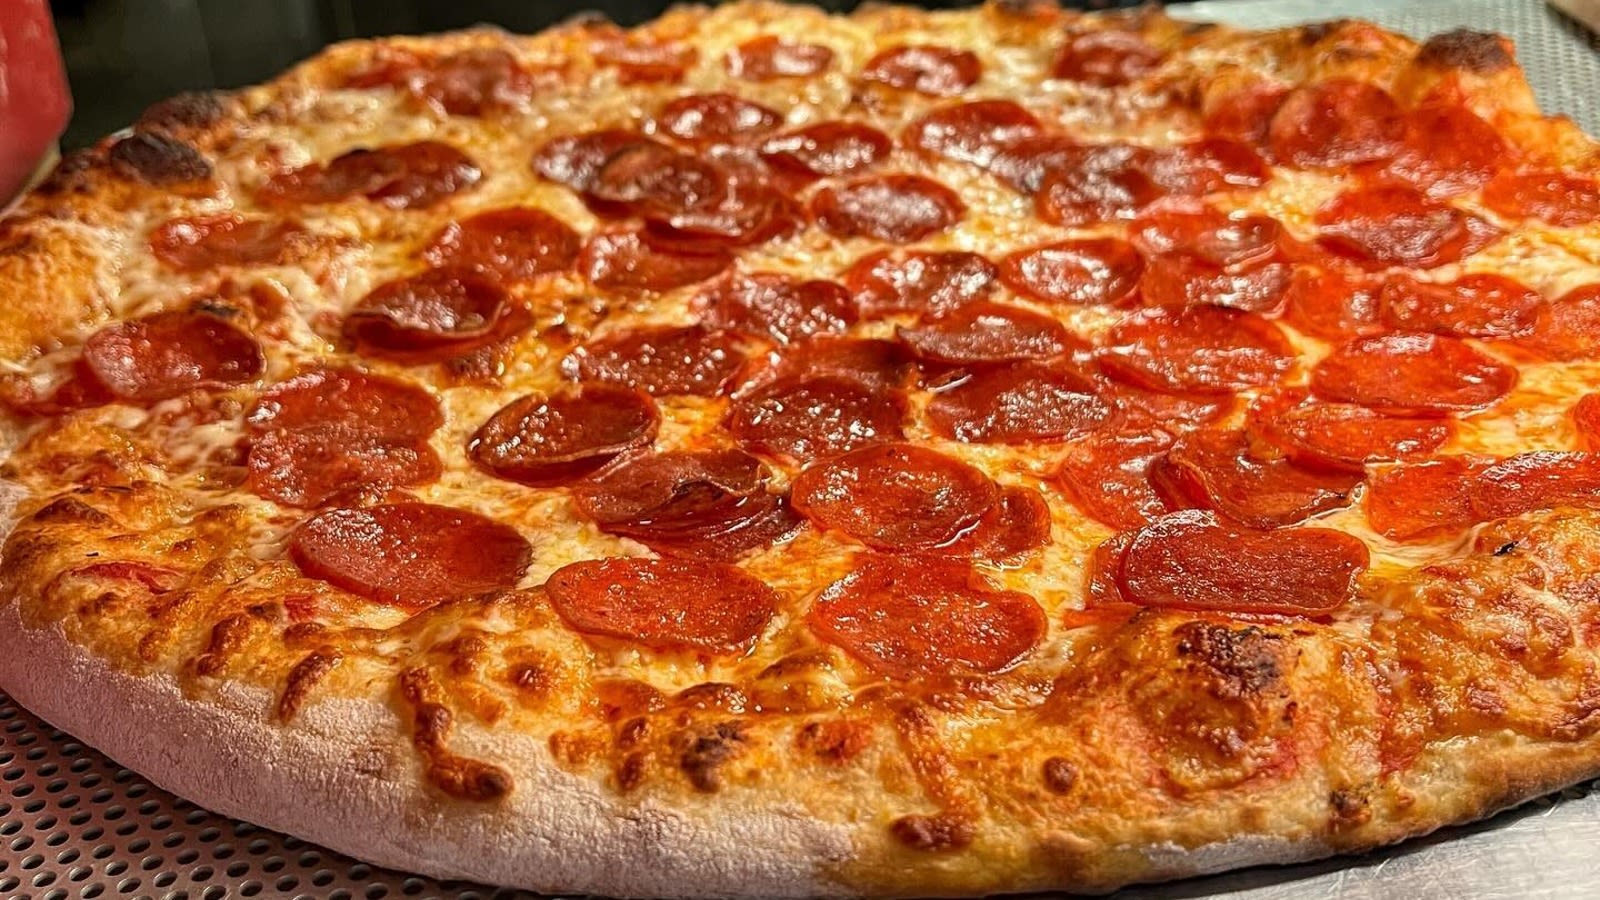 Boston's Oldest Pizzeria Has Been Open Since 1926